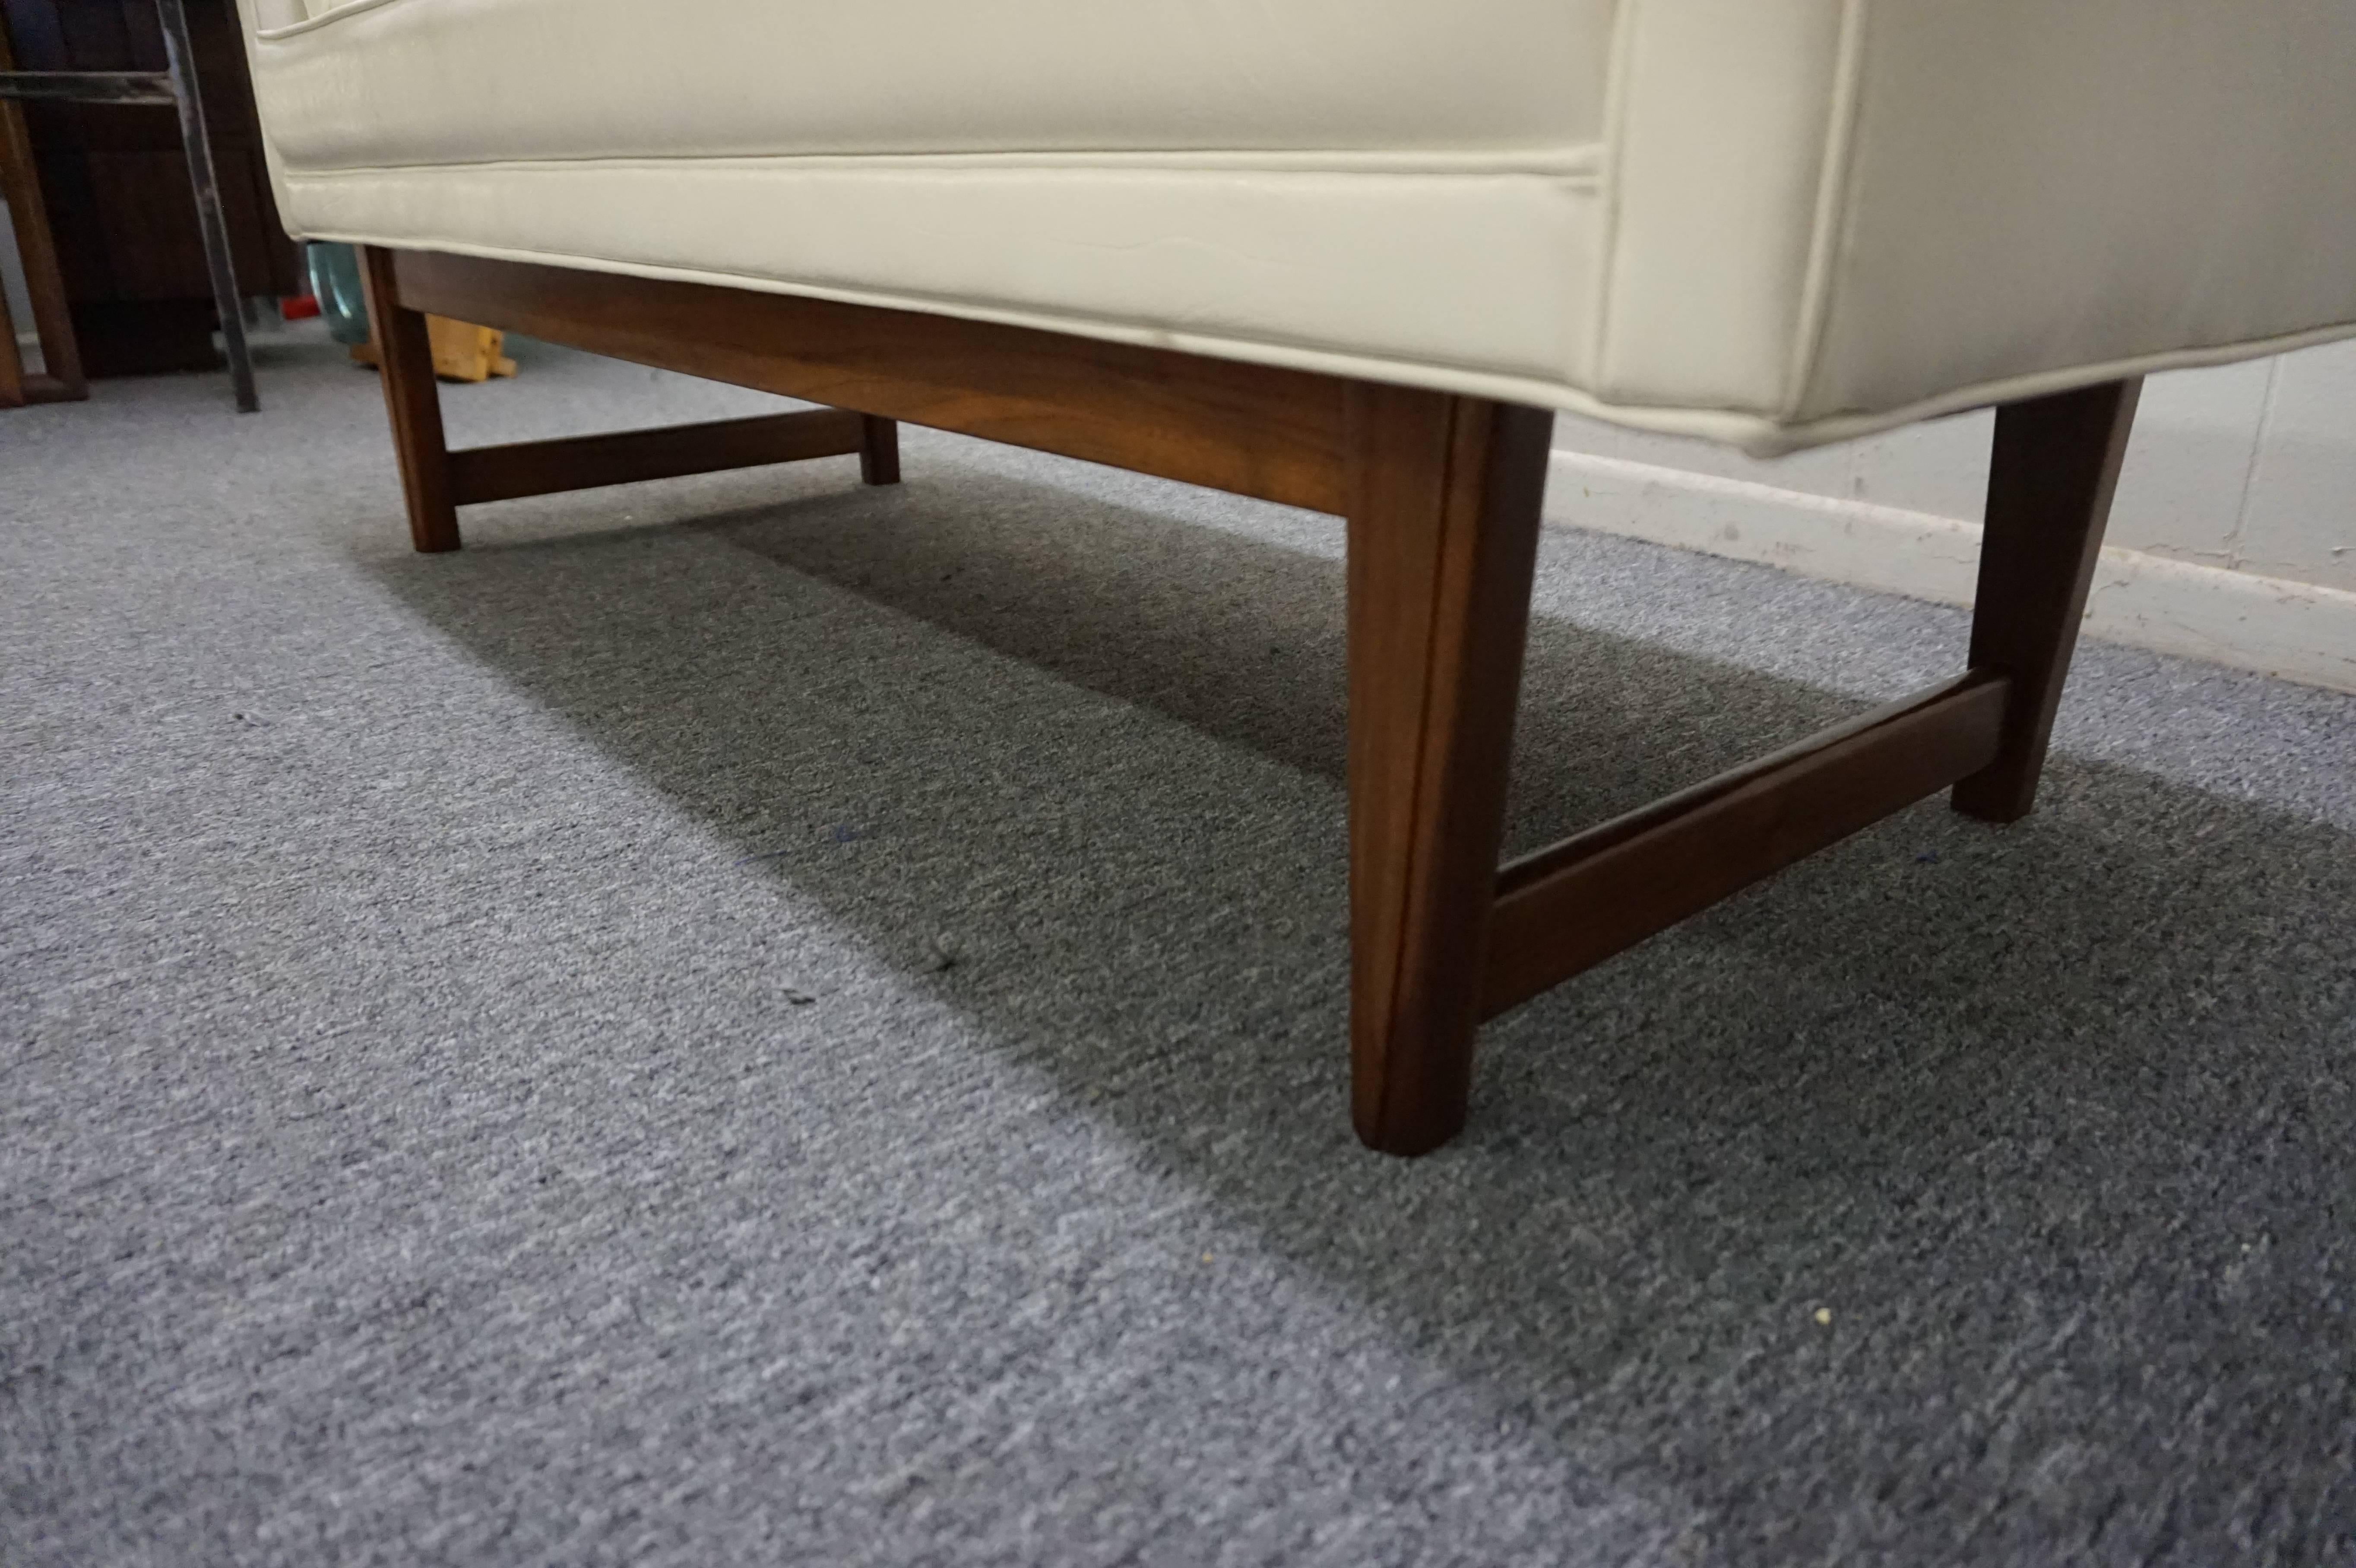 Handsome Upholstered American Mid-century Walnut Bench 1